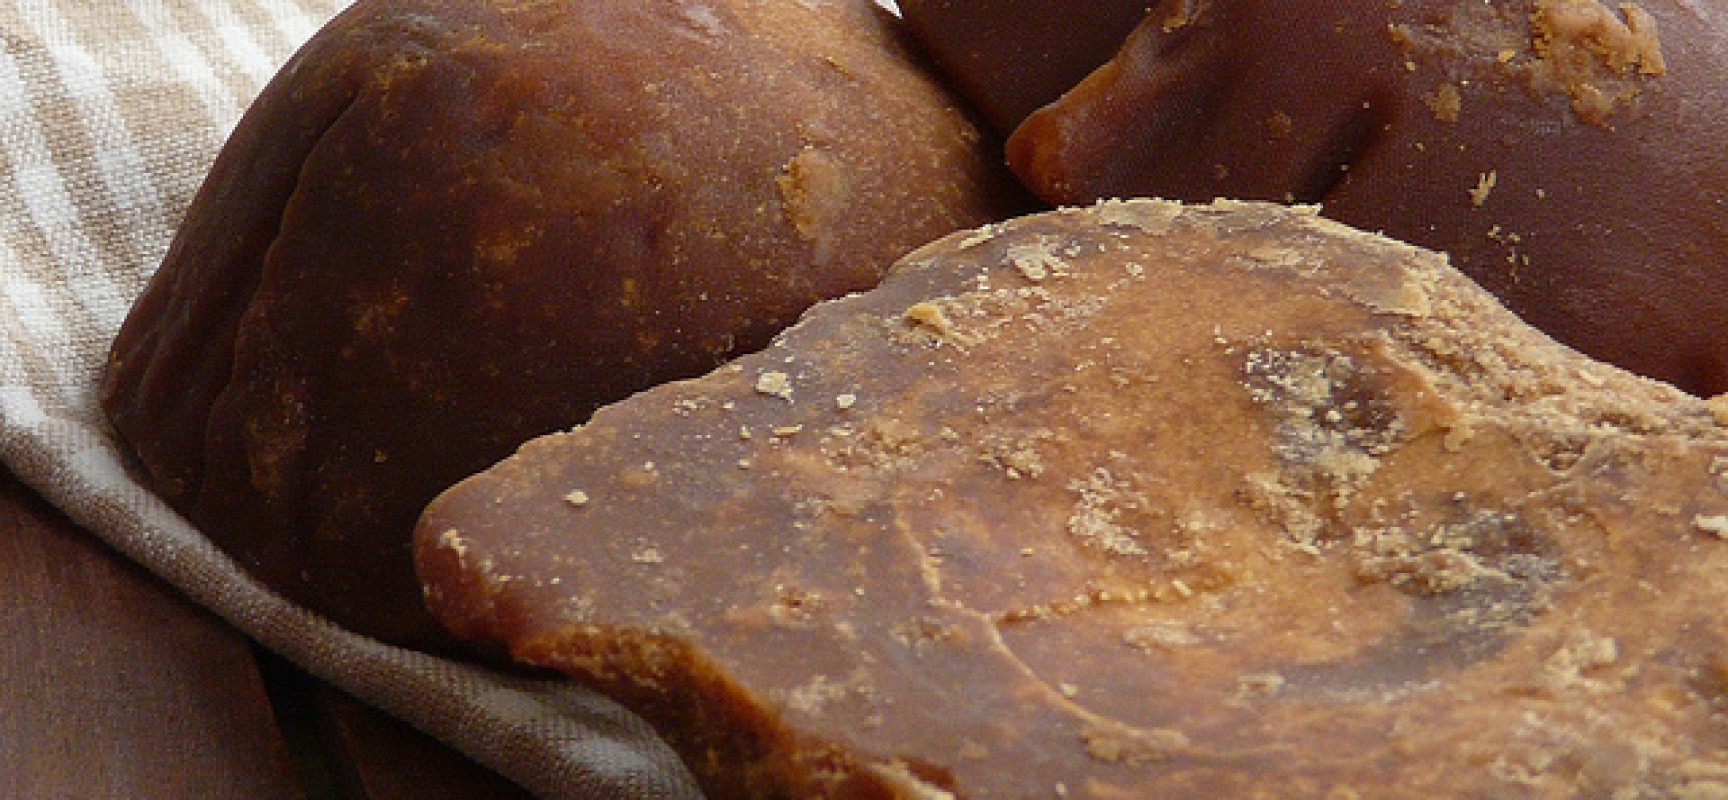 The Wonder Ingredient that is Jaggery!